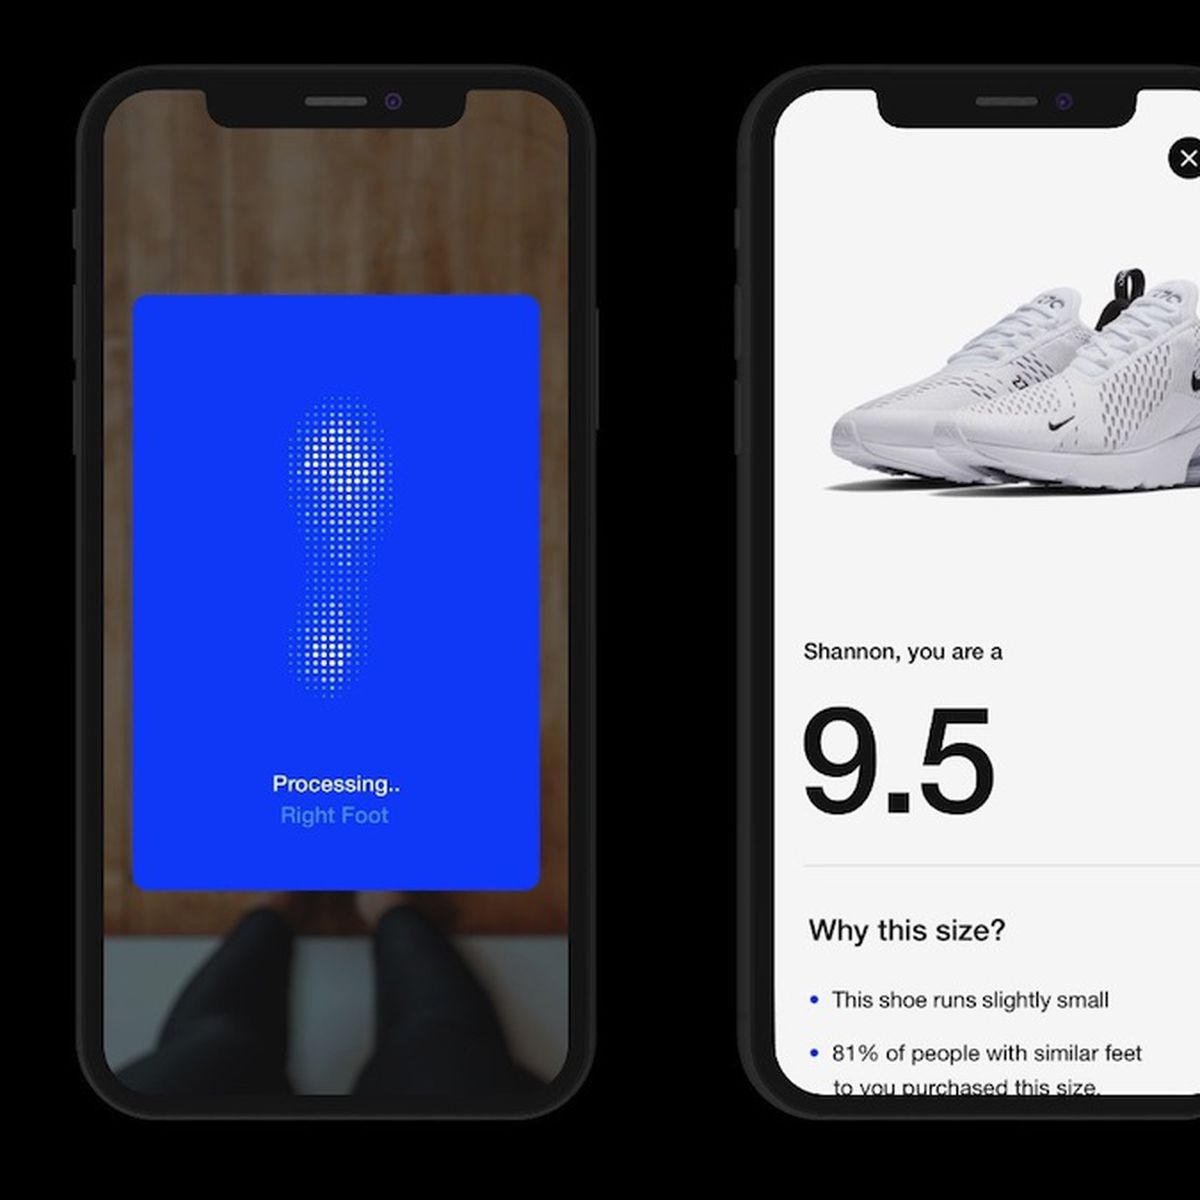 Nike Reveals Feature That Will Let You Find The Perfect Shoe Size Using Your iPhone - MacRumors